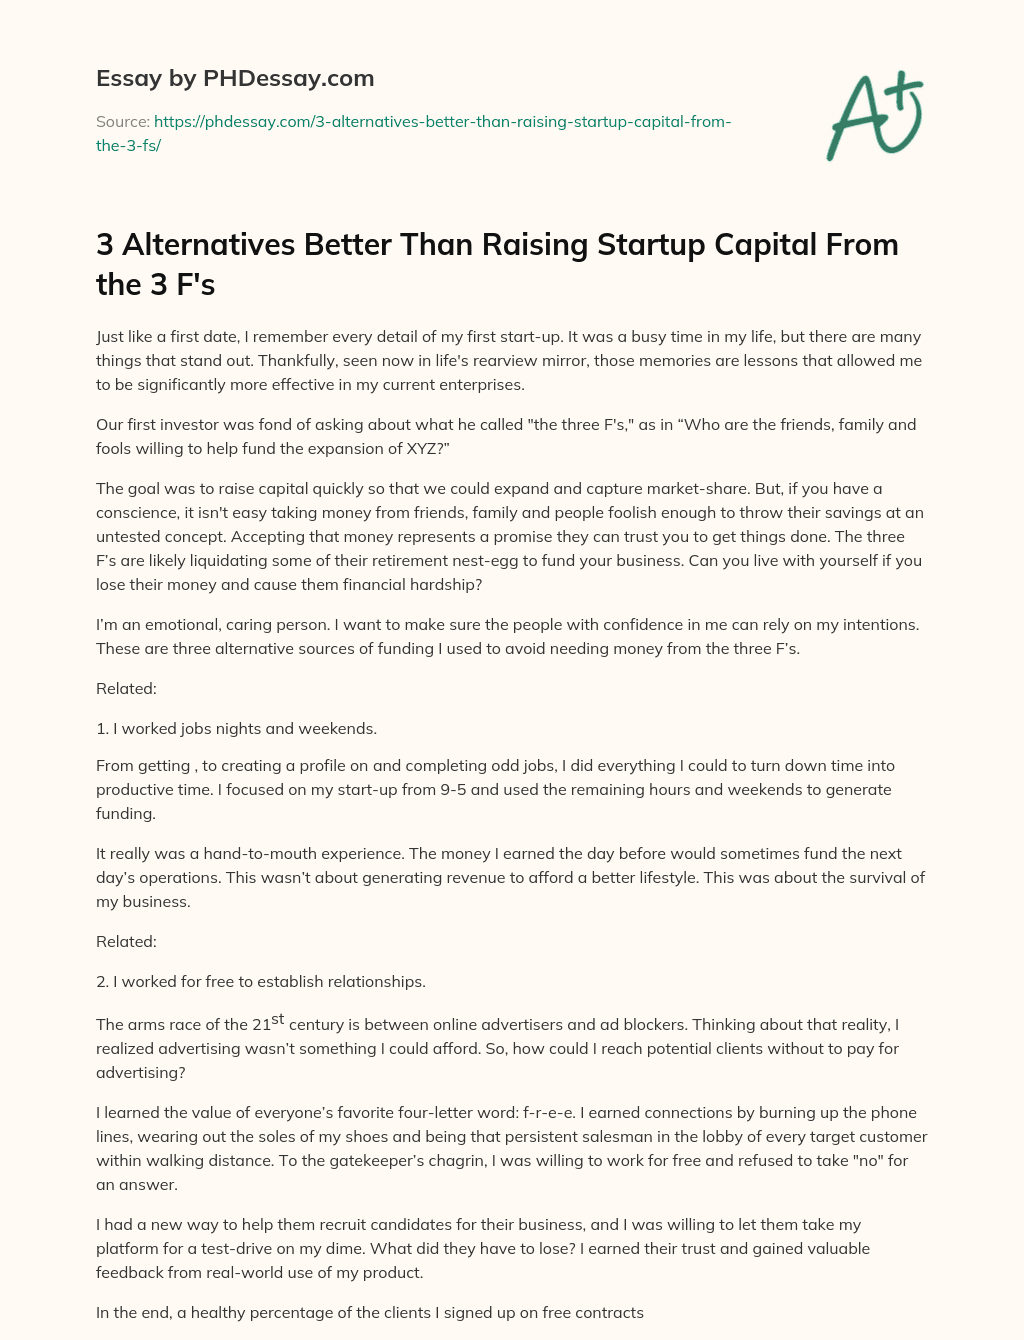 3 Alternatives Better Than Raising Startup Capital From the 3 F’s essay